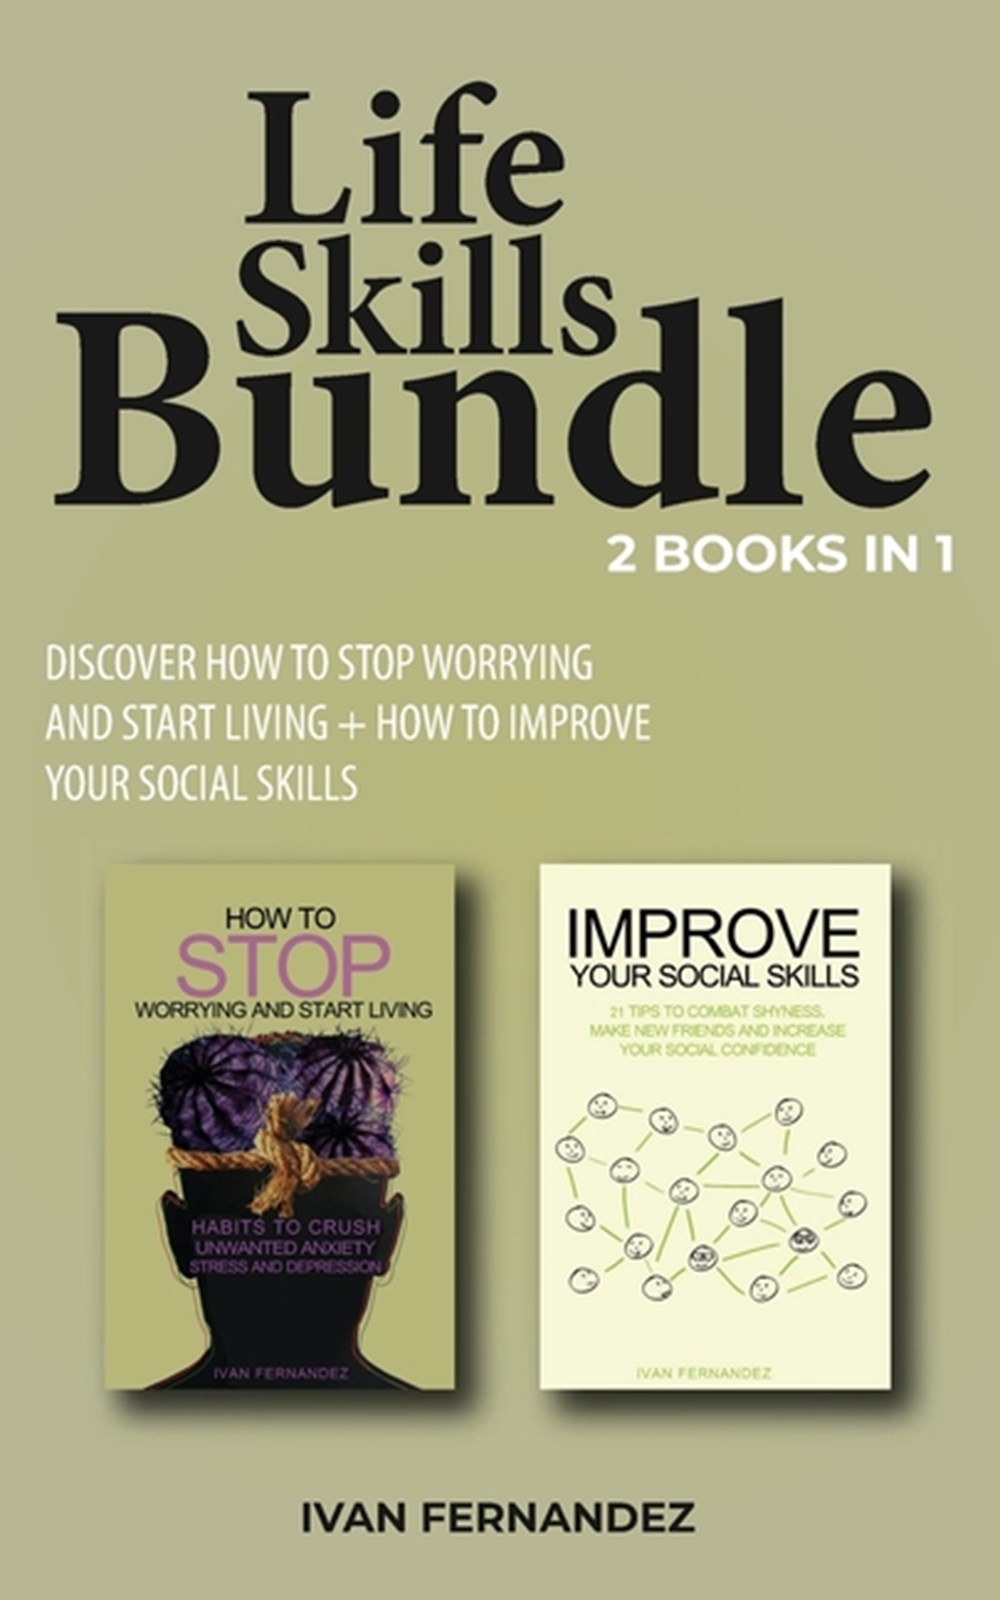 Life Skills Bundle 2 Books in 1: Discover How to Stop Worrying and Start Living + How to Improve You